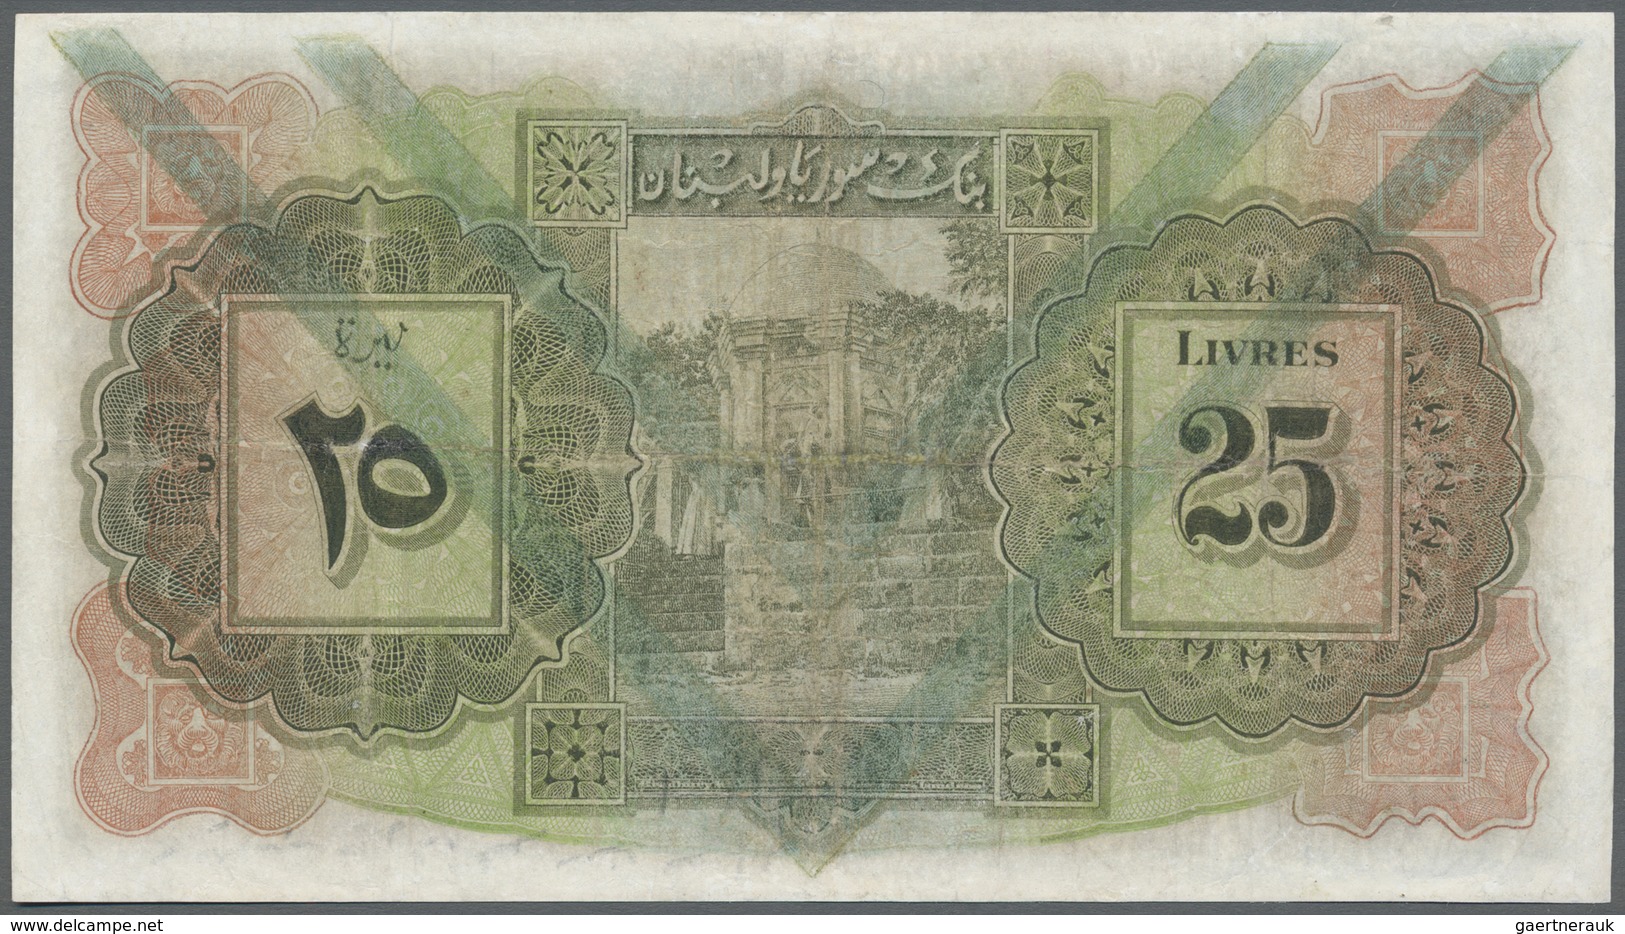 Syria / Syrien: 25 Livres 1939 P. 43c, Stronger Used, Washed, Pressed And Restored, Condition: VG. - Syria